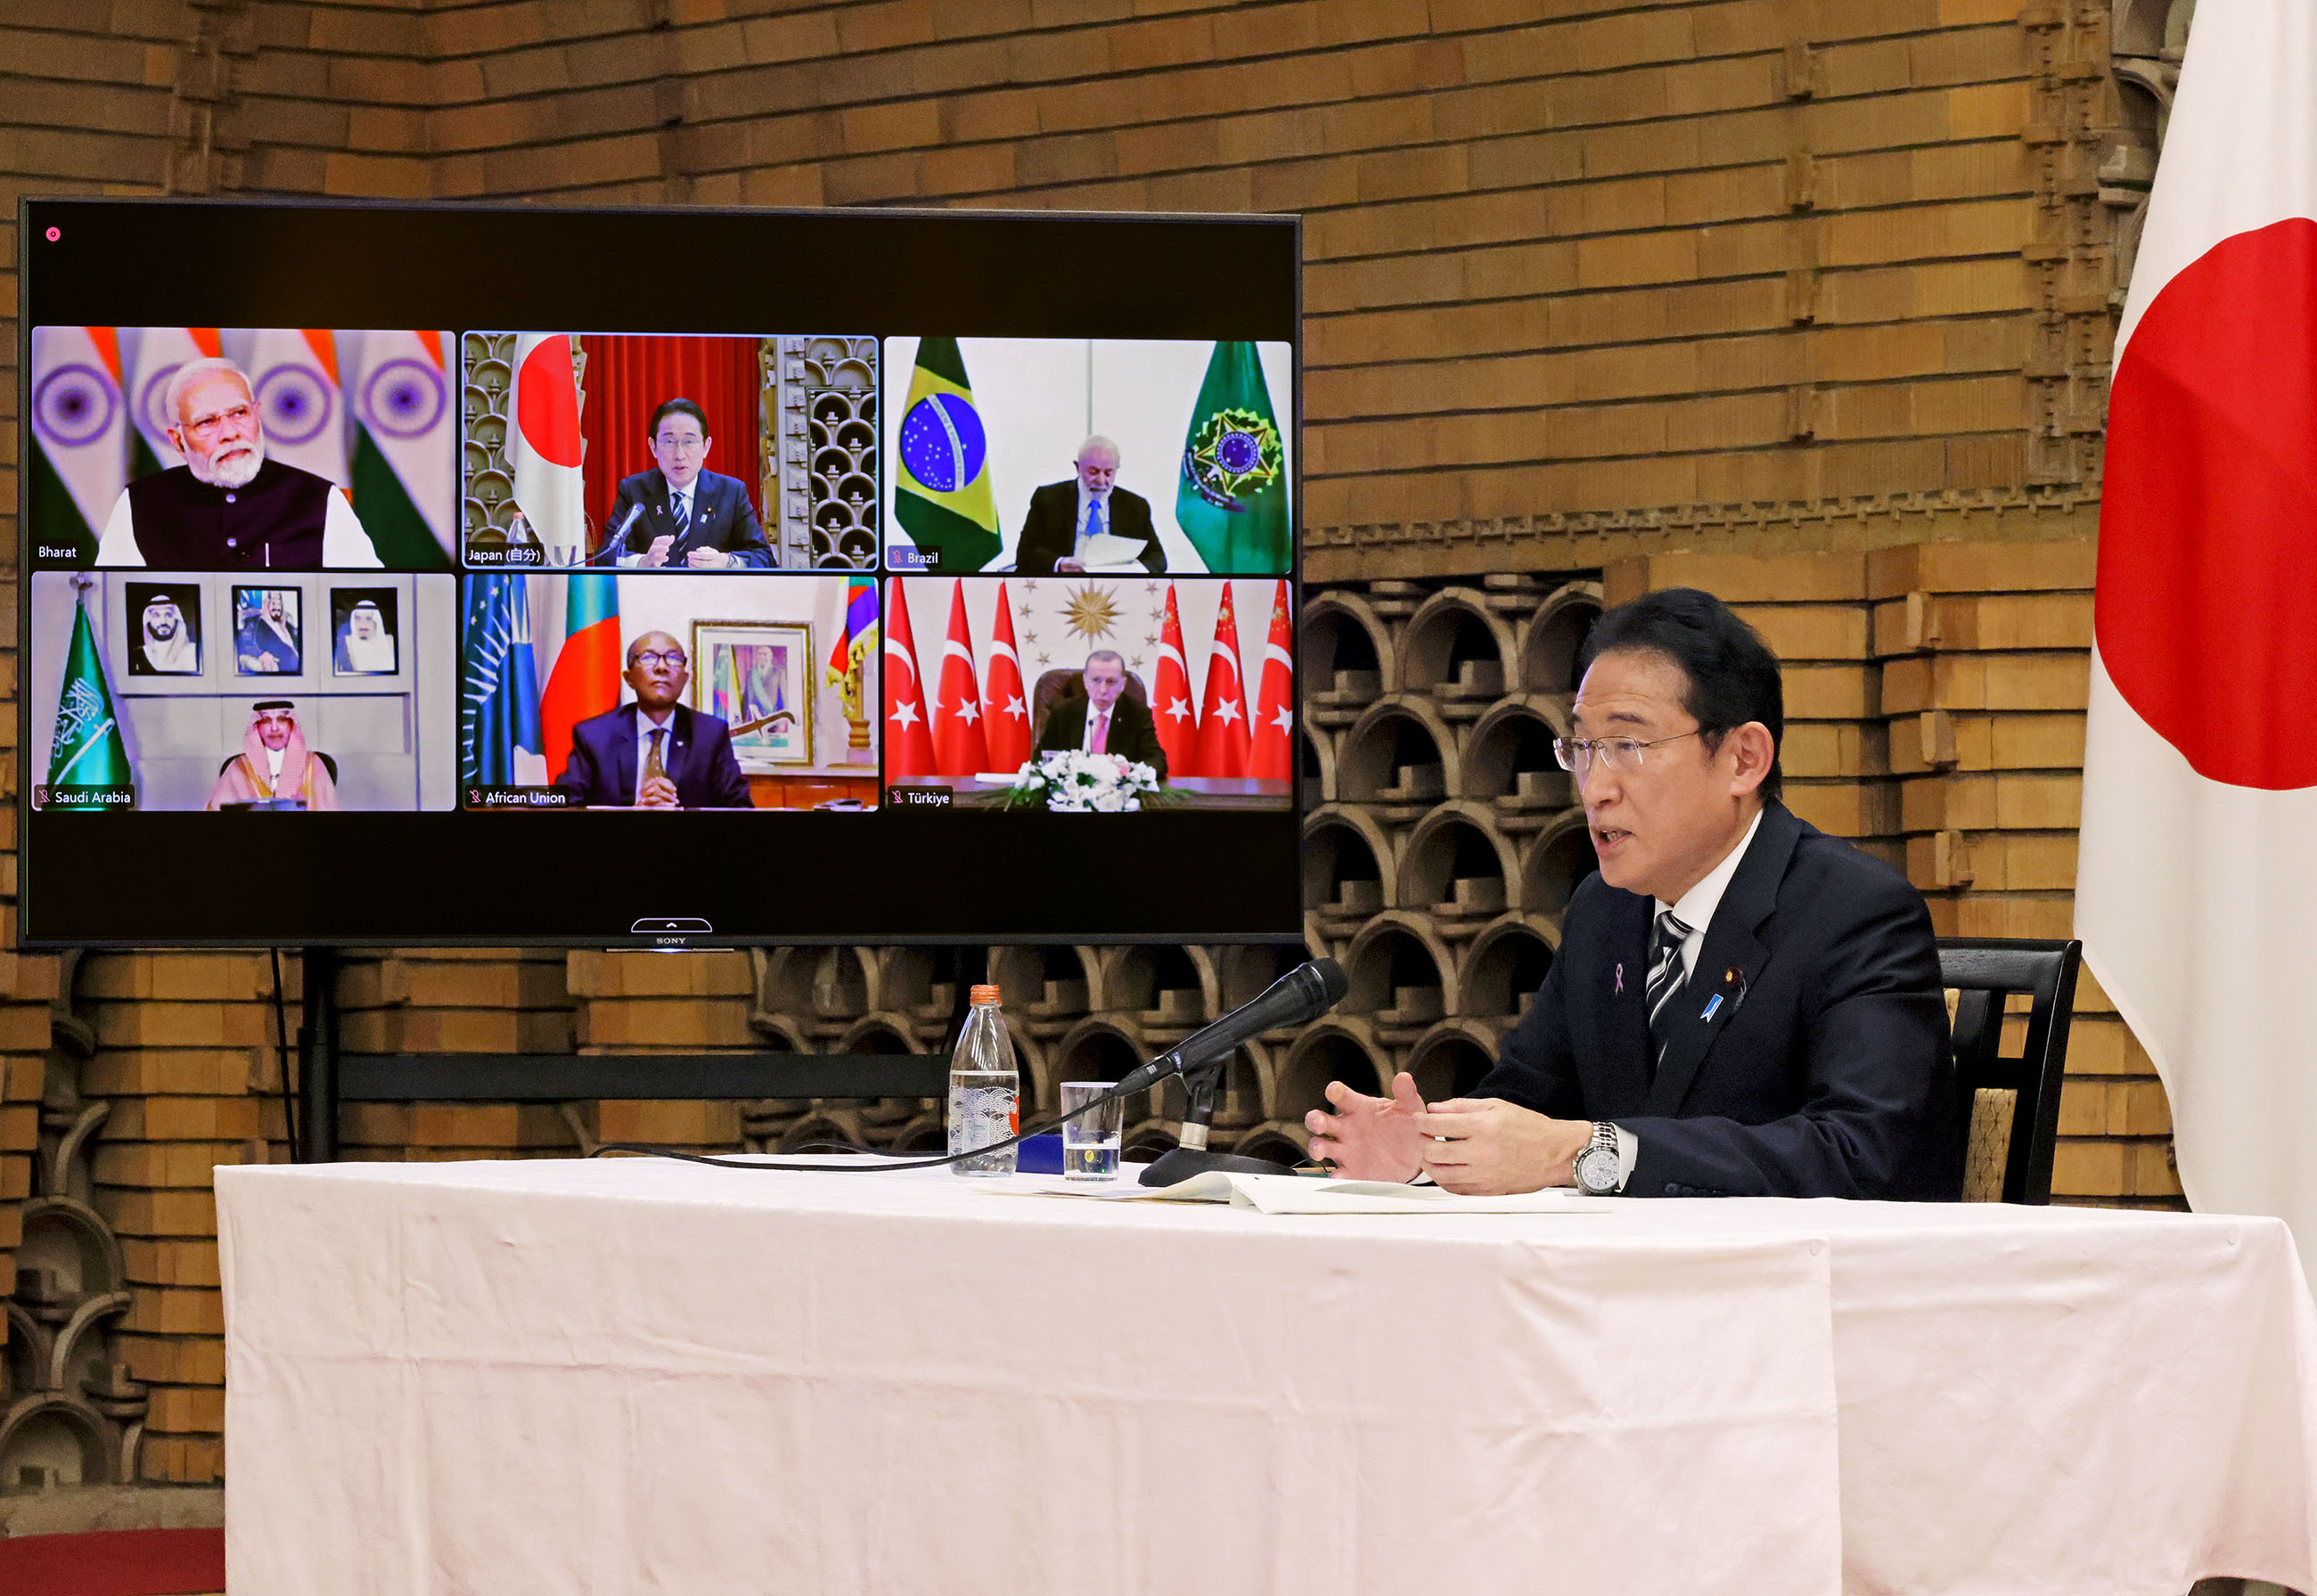 Prime Minister Kishida speaking at the G20 Leaders’ Video Conference